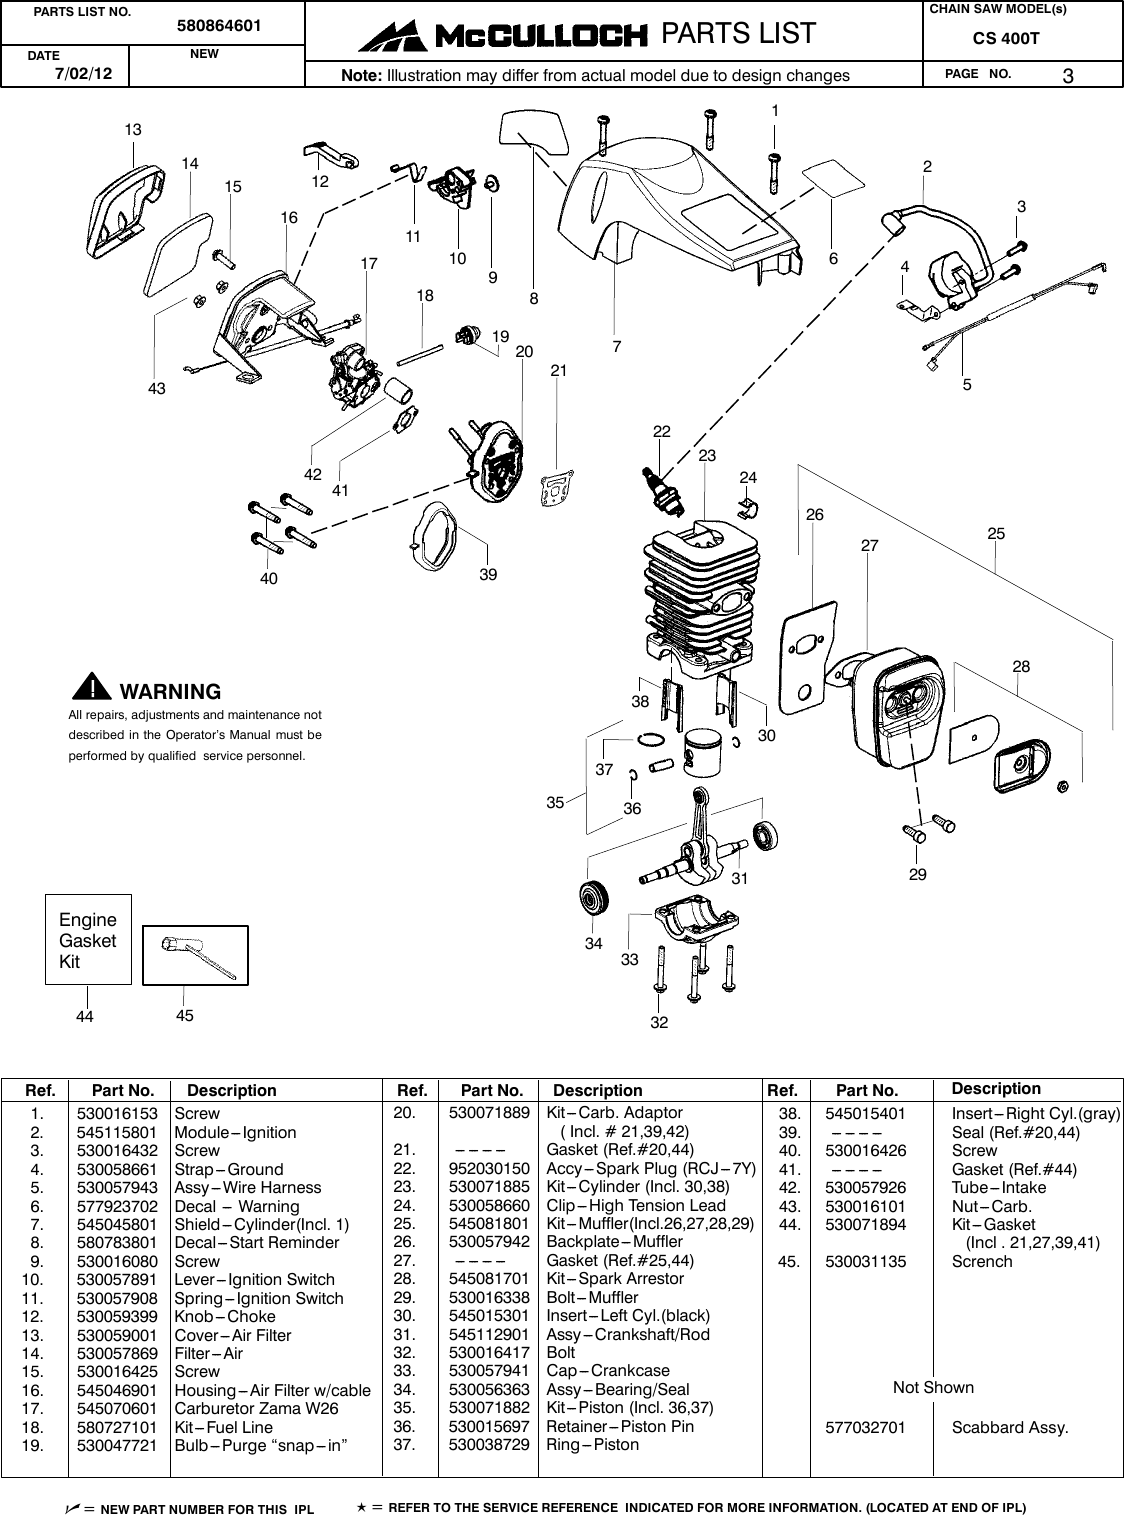 Page 3 of 3 - McCulloch 580864601 IPL, McCulloch, CS 400T, 967156318, 2012-08, Chain Saw User Manual  To The Bb5133b3-e36e-45ab-986c-f56c54bc8378